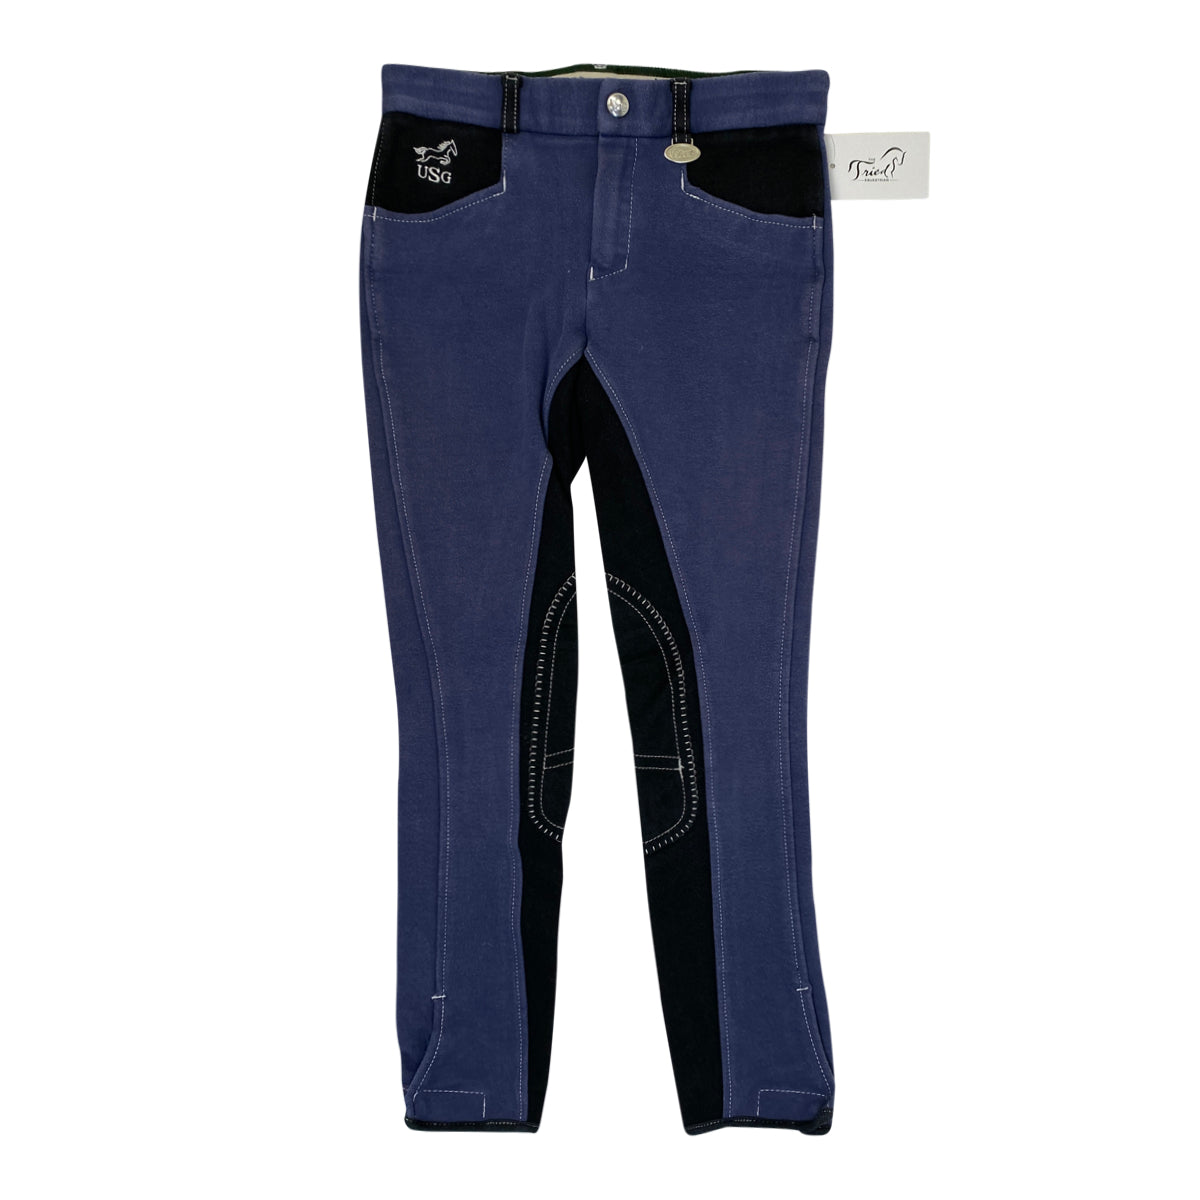 USG Knee Patch Contrast Breeches in Purple/Black